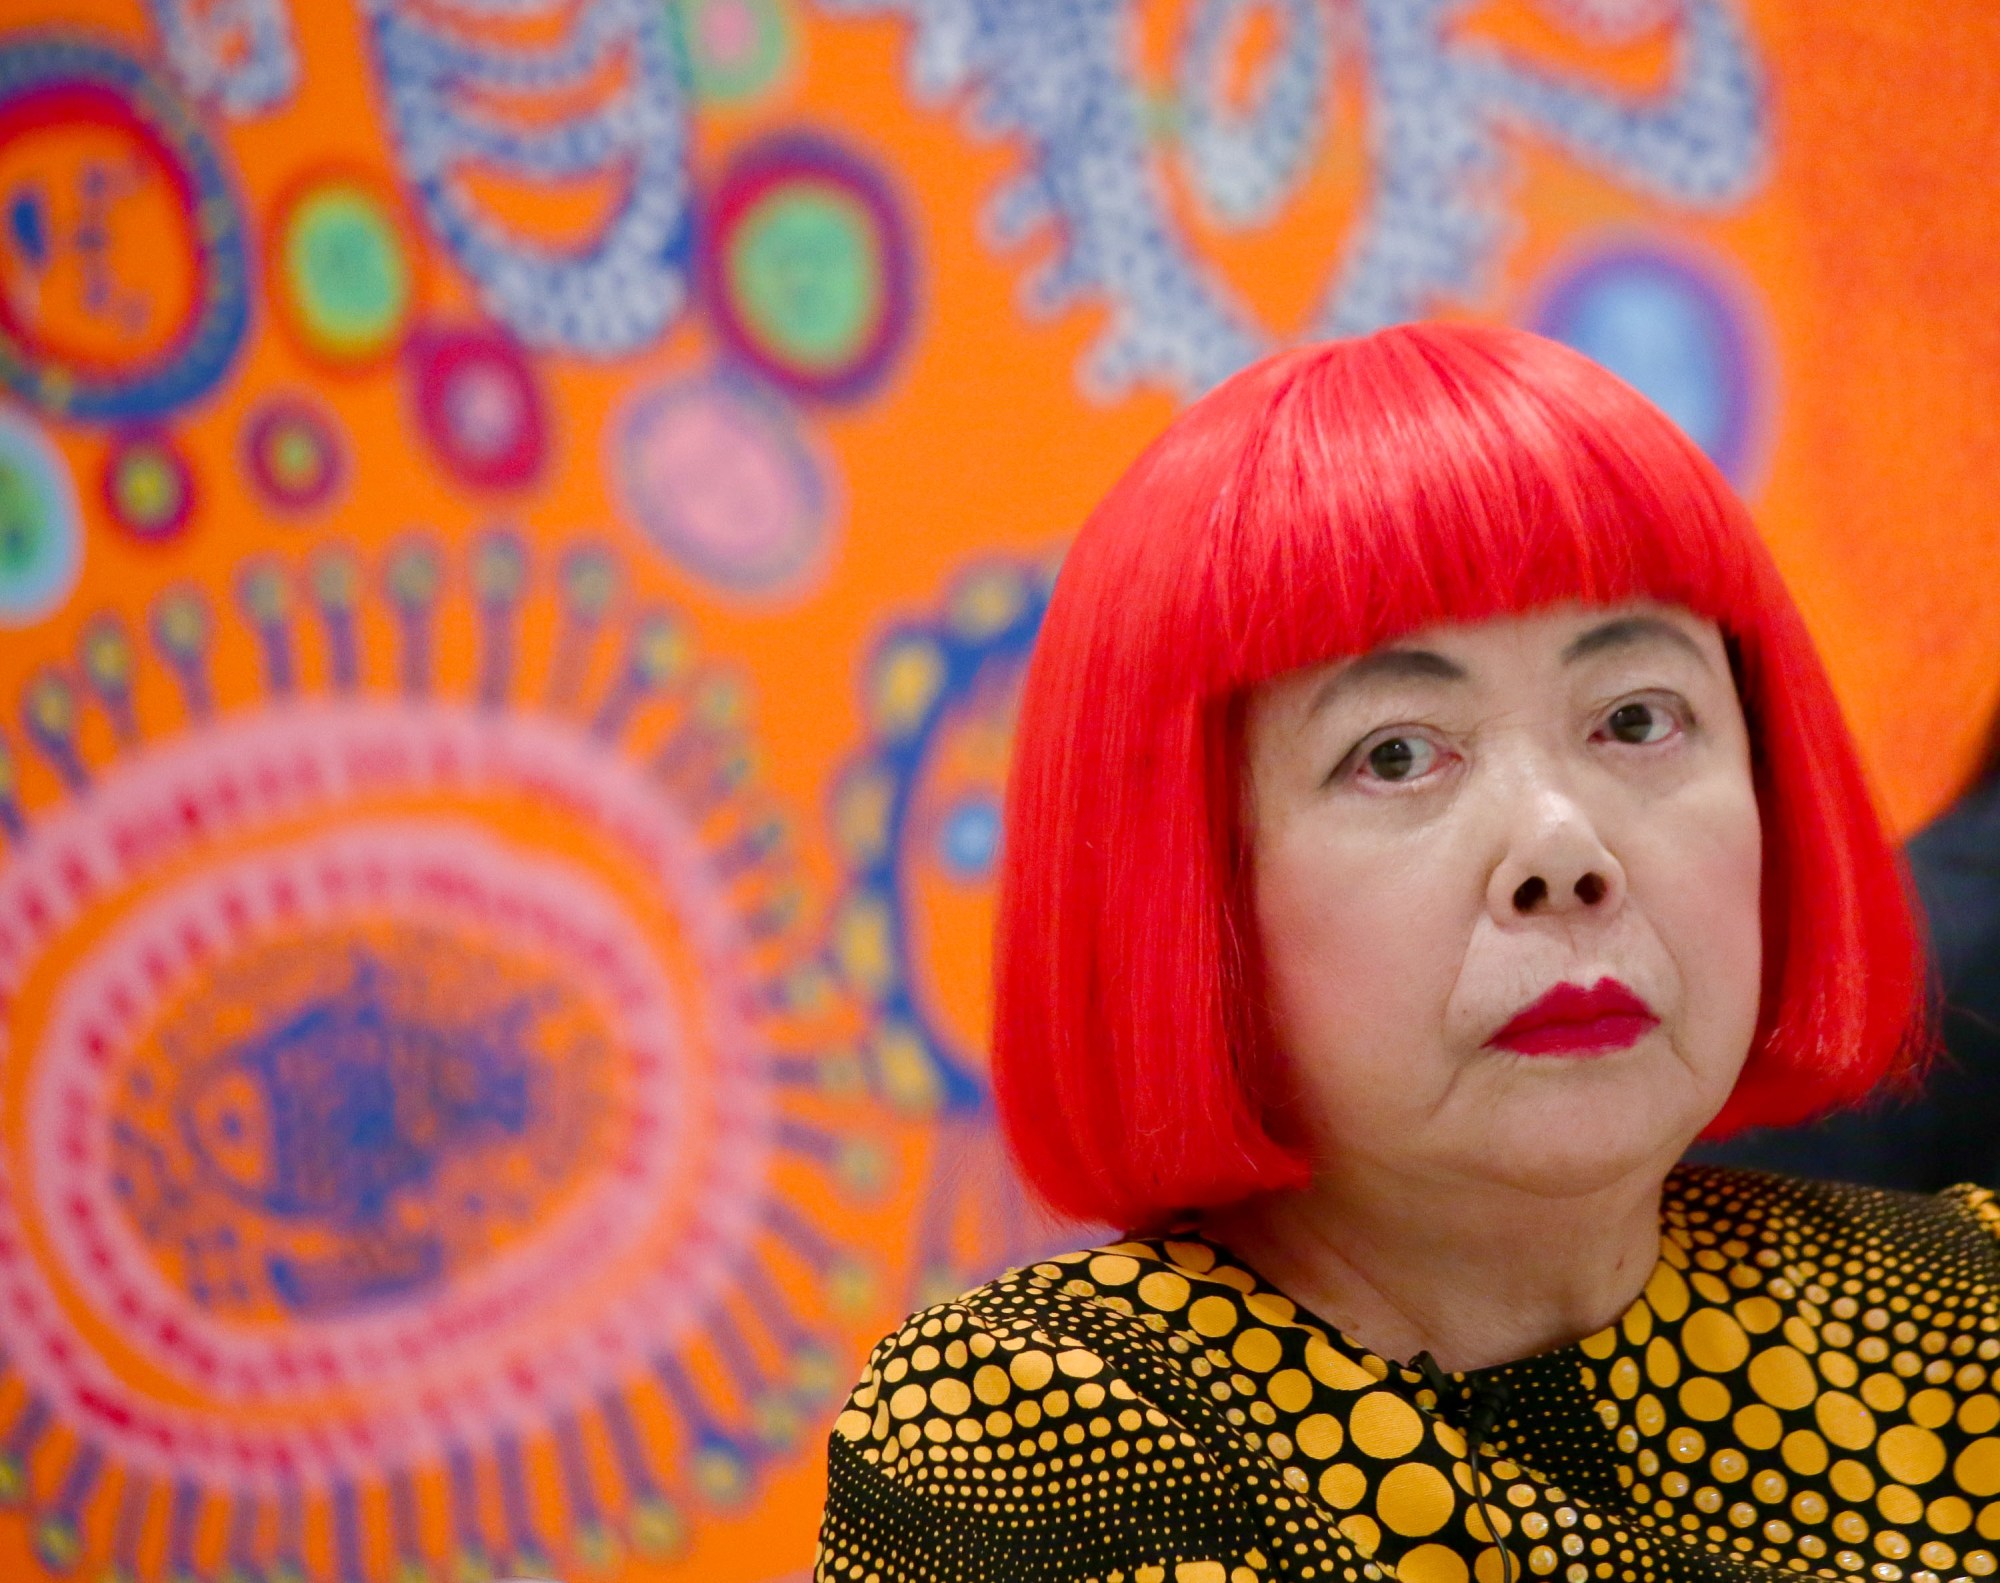 NEW YORK, NY - NOVEMBER 07:  Yayoi Kusama attends the Yayoi Kusama "I Who Have Arrived In Heaven" Exhibition Press Preview at David Zwirner Art Gallery on November 7, 2013 in New York City.  (Photo by Andrew Toth/Getty Images)